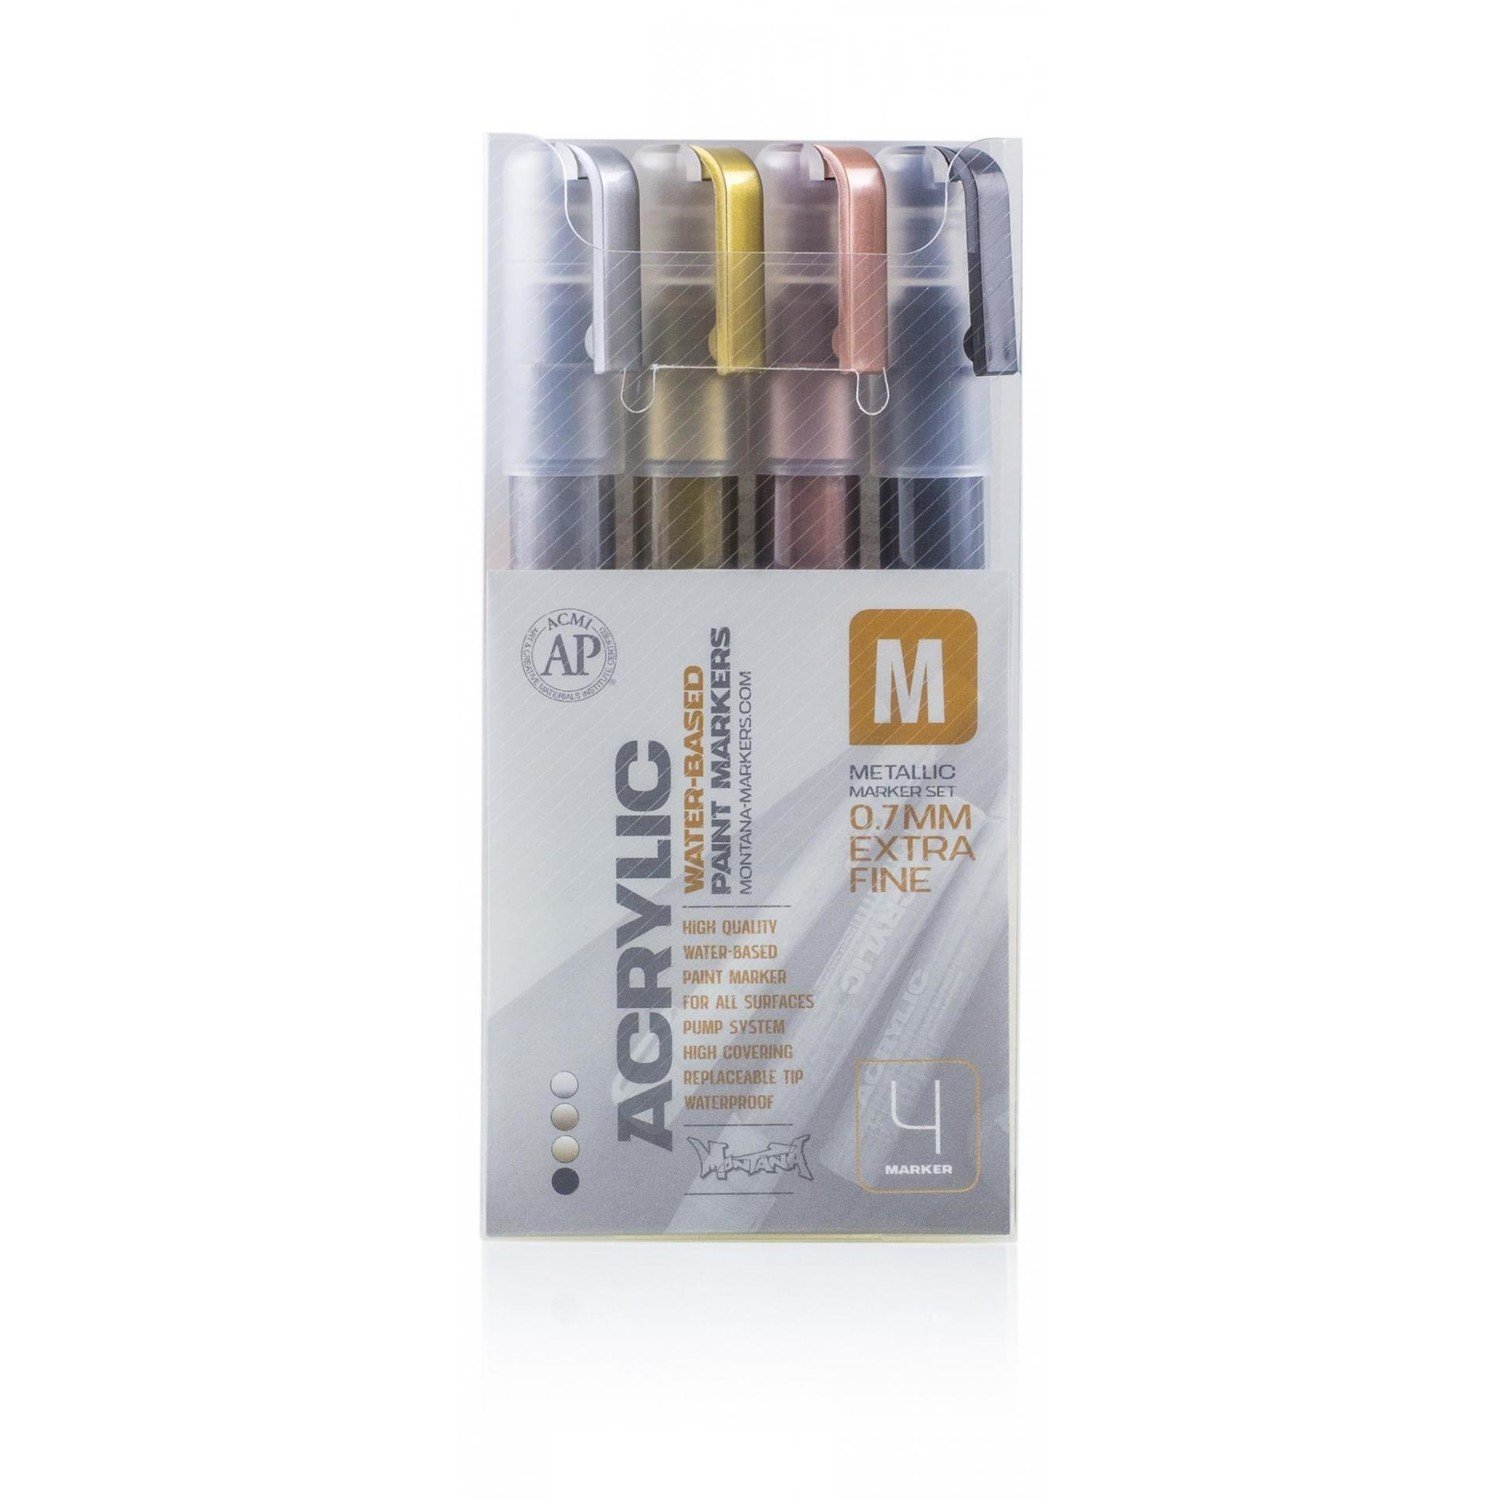 Montana Acrylic Paint Markers, Extra Fine (0.7 mm) – St. Louis Art Supply